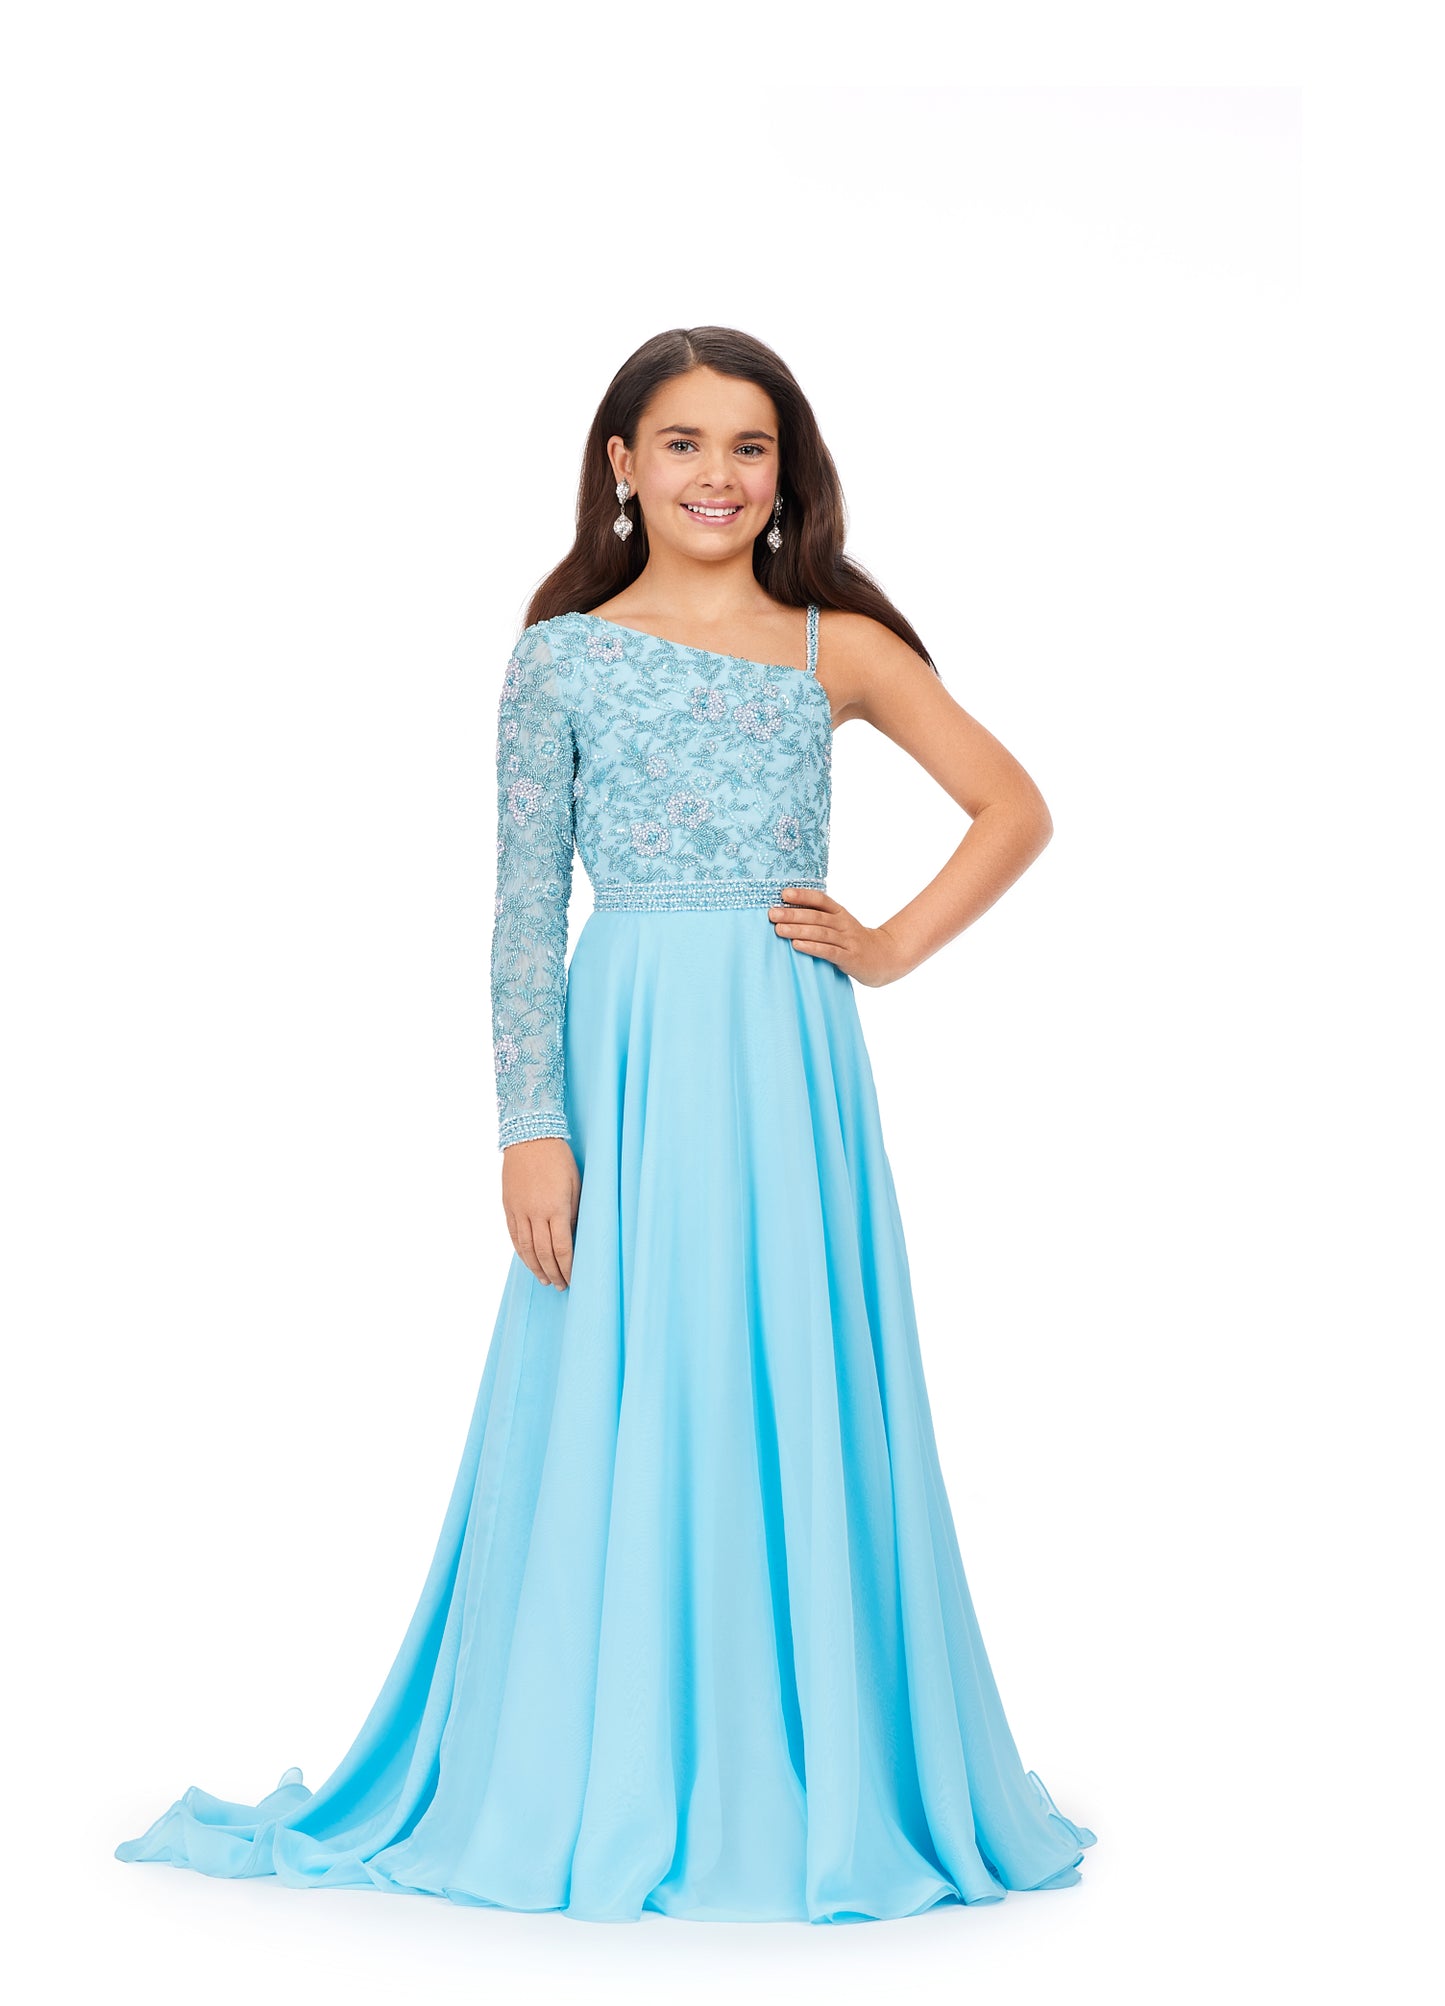 Ashley Lauren Kids 8197 One Shoulder Fully Beaded Bodice A-Line Chiffon Skirt Gown. Make all your dreams come true in this stunning one shoulder gown. With gorgeous beaded details throughout the top and a chiffon skirt, this dress is sure to WOW the crowd!'